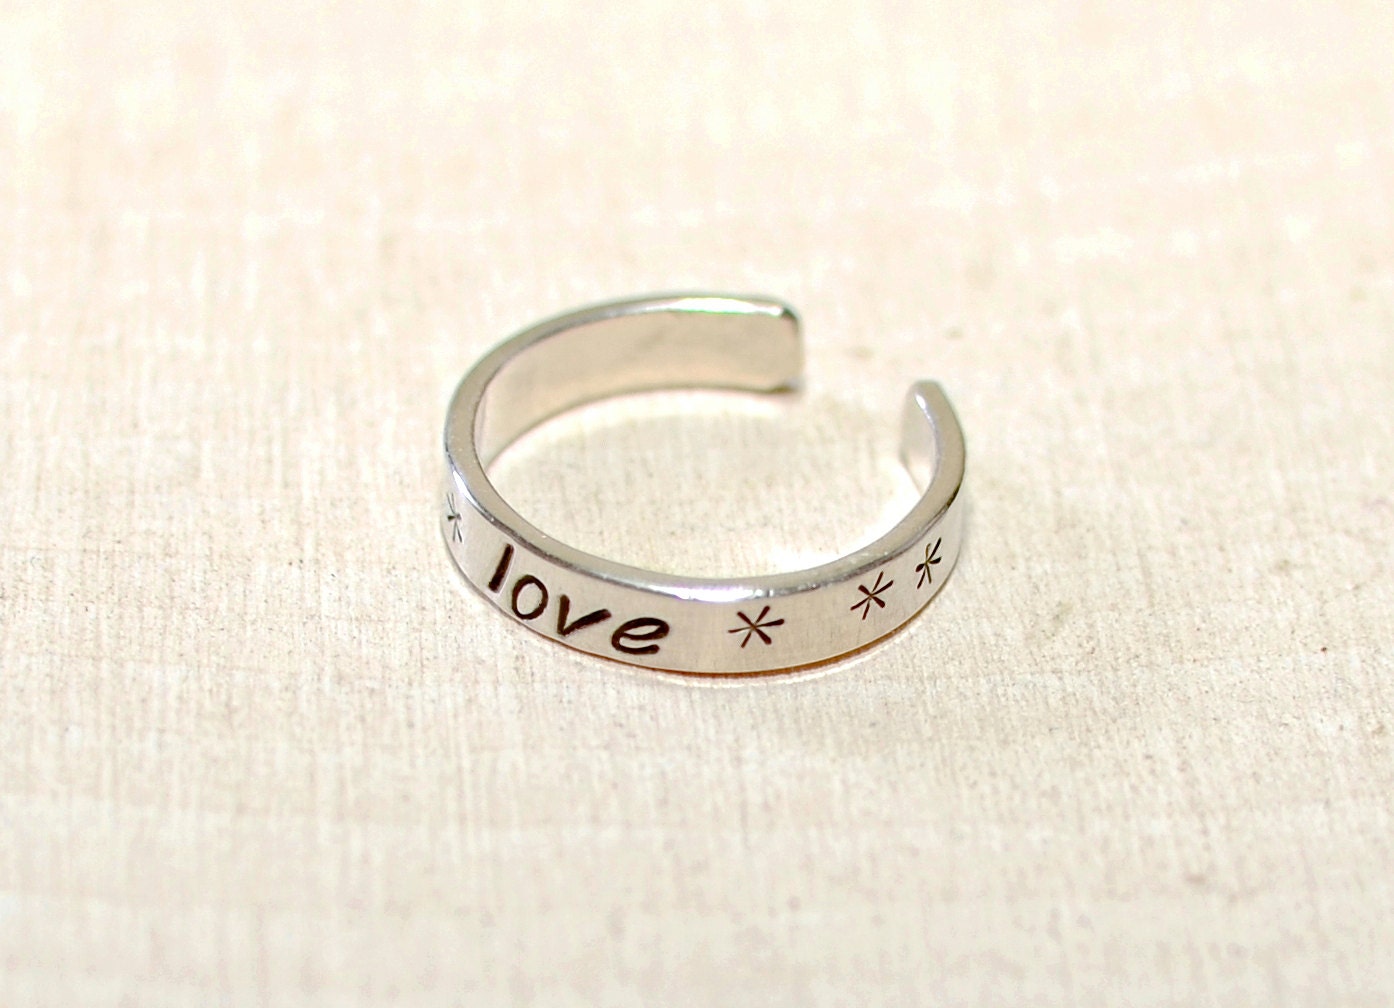 Narrow style dainty toe ring in sterling silver with love